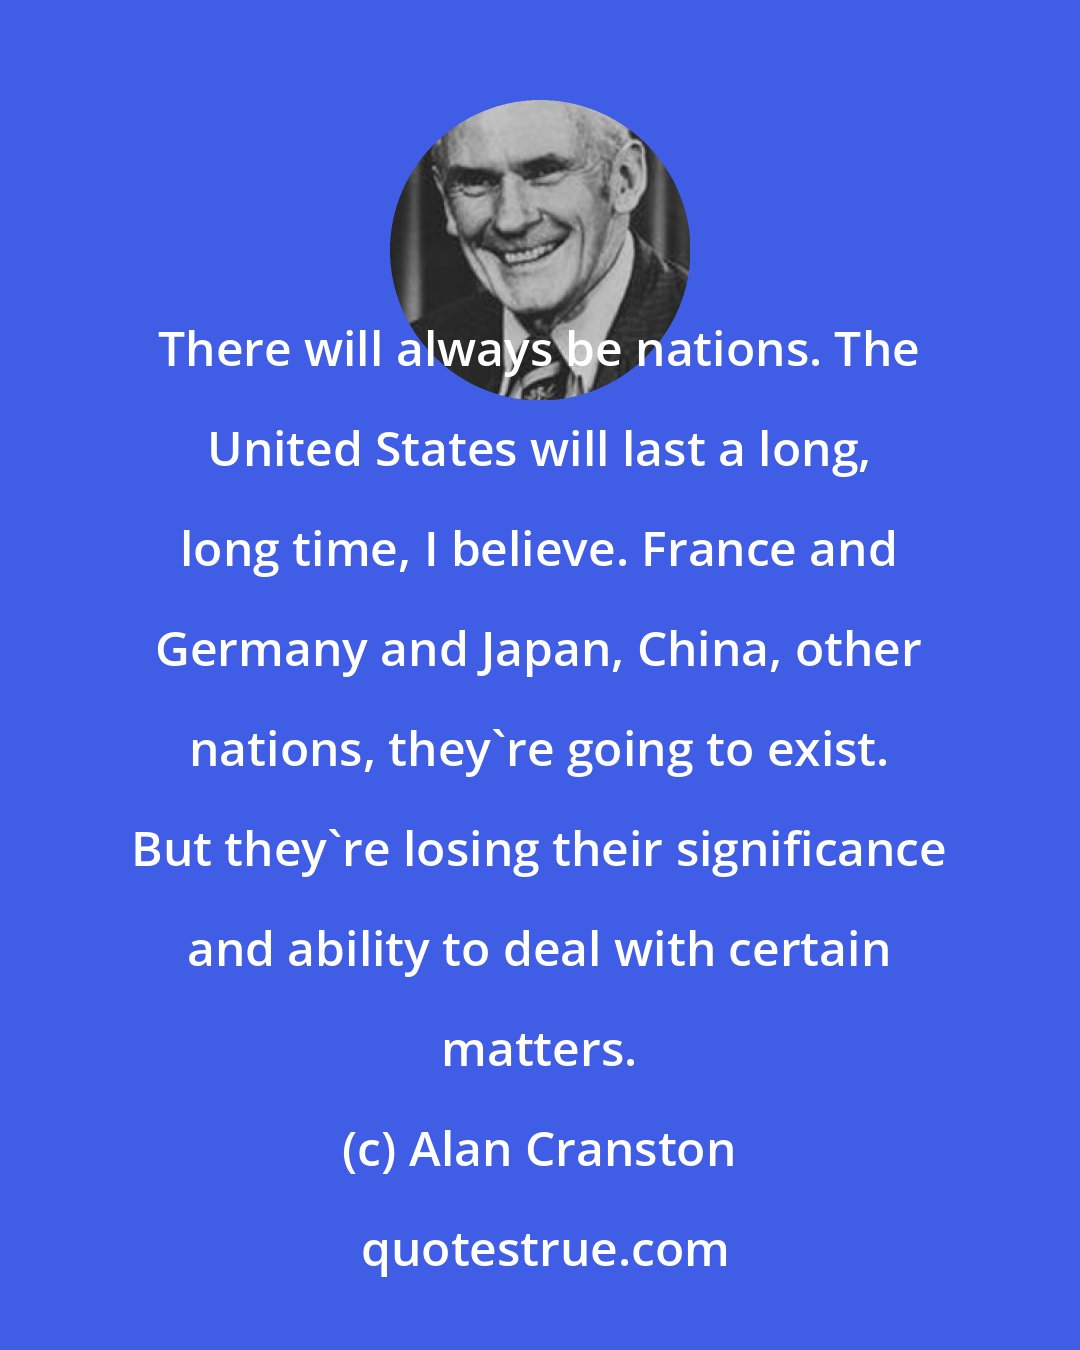 Alan Cranston: There will always be nations. The United States will last a long, long time, I believe. France and Germany and Japan, China, other nations, they're going to exist. But they're losing their significance and ability to deal with certain matters.